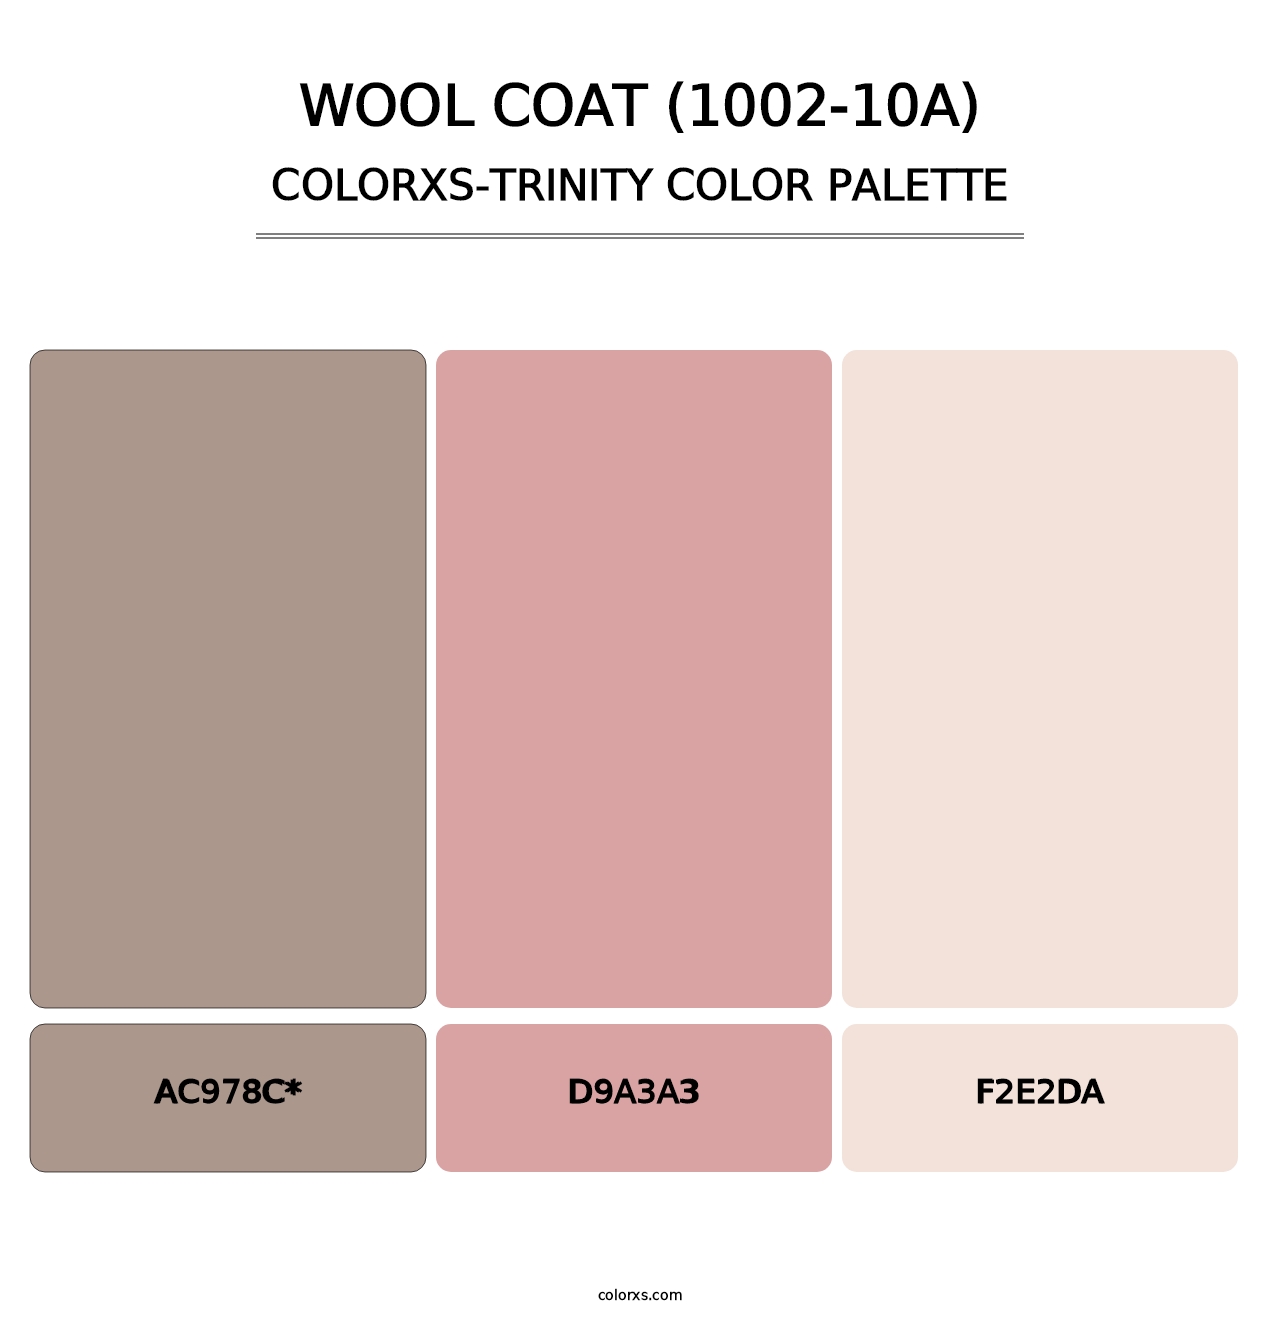 Wool Coat (1002-10A) - Colorxs Trinity Palette